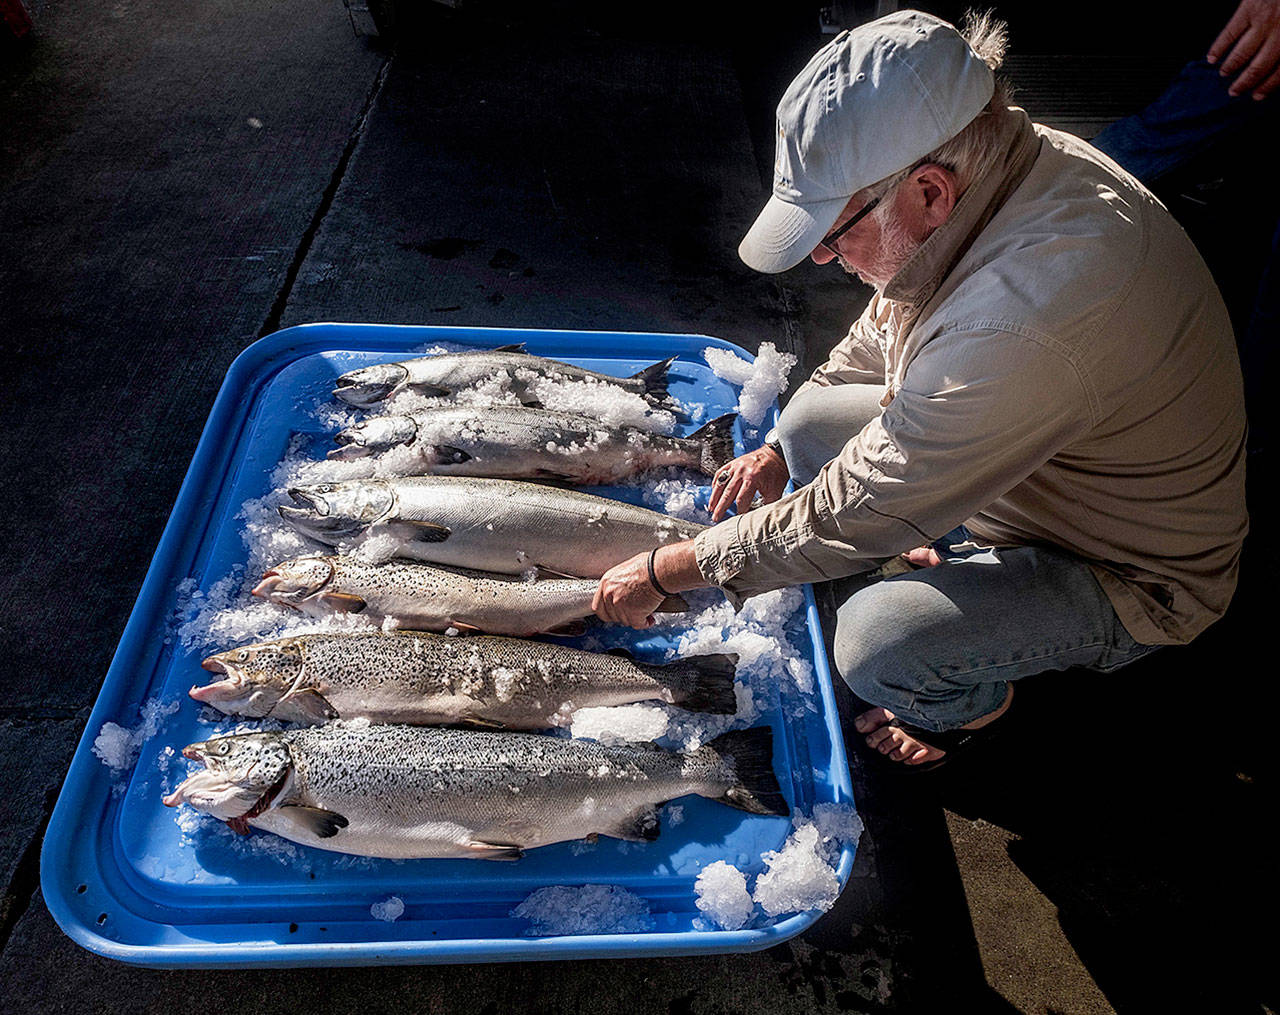 Riley Starks, of Lummi Island Wild, a wild-salmon purveyor, shows three farm-raised Atlantic salmon that were caught alongside healthy Kings in Point Williams in August, after the accidental release. (Dean Rutz / The Seattle Times file)